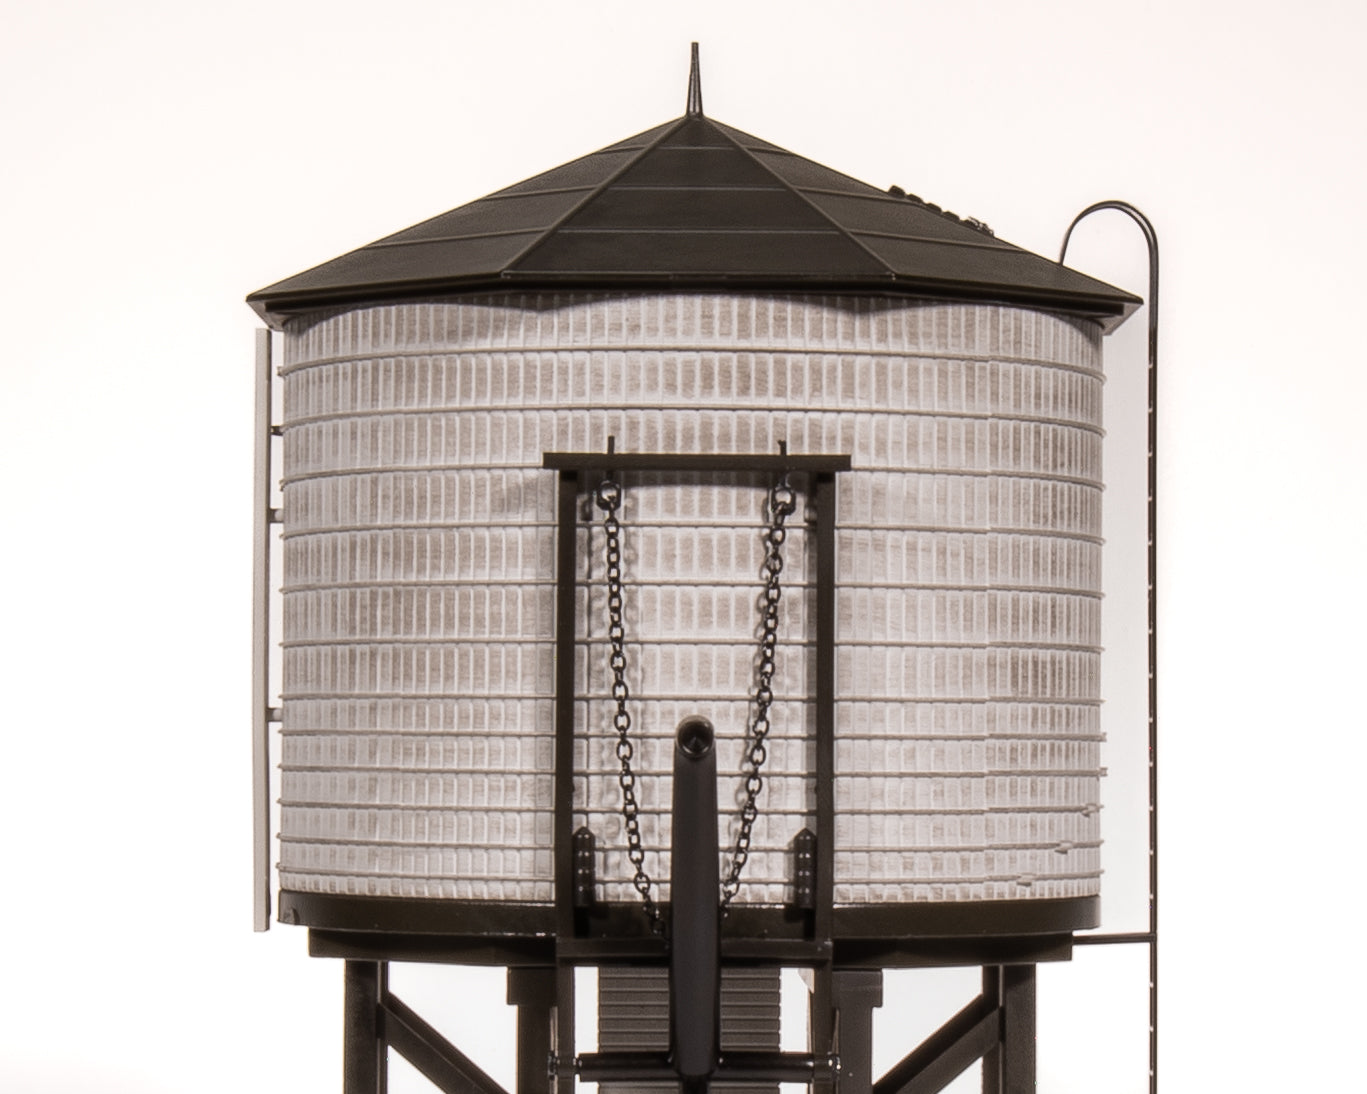 7918 Operating Water Tower w/ Sound, GN, Weathered, HO Default Title